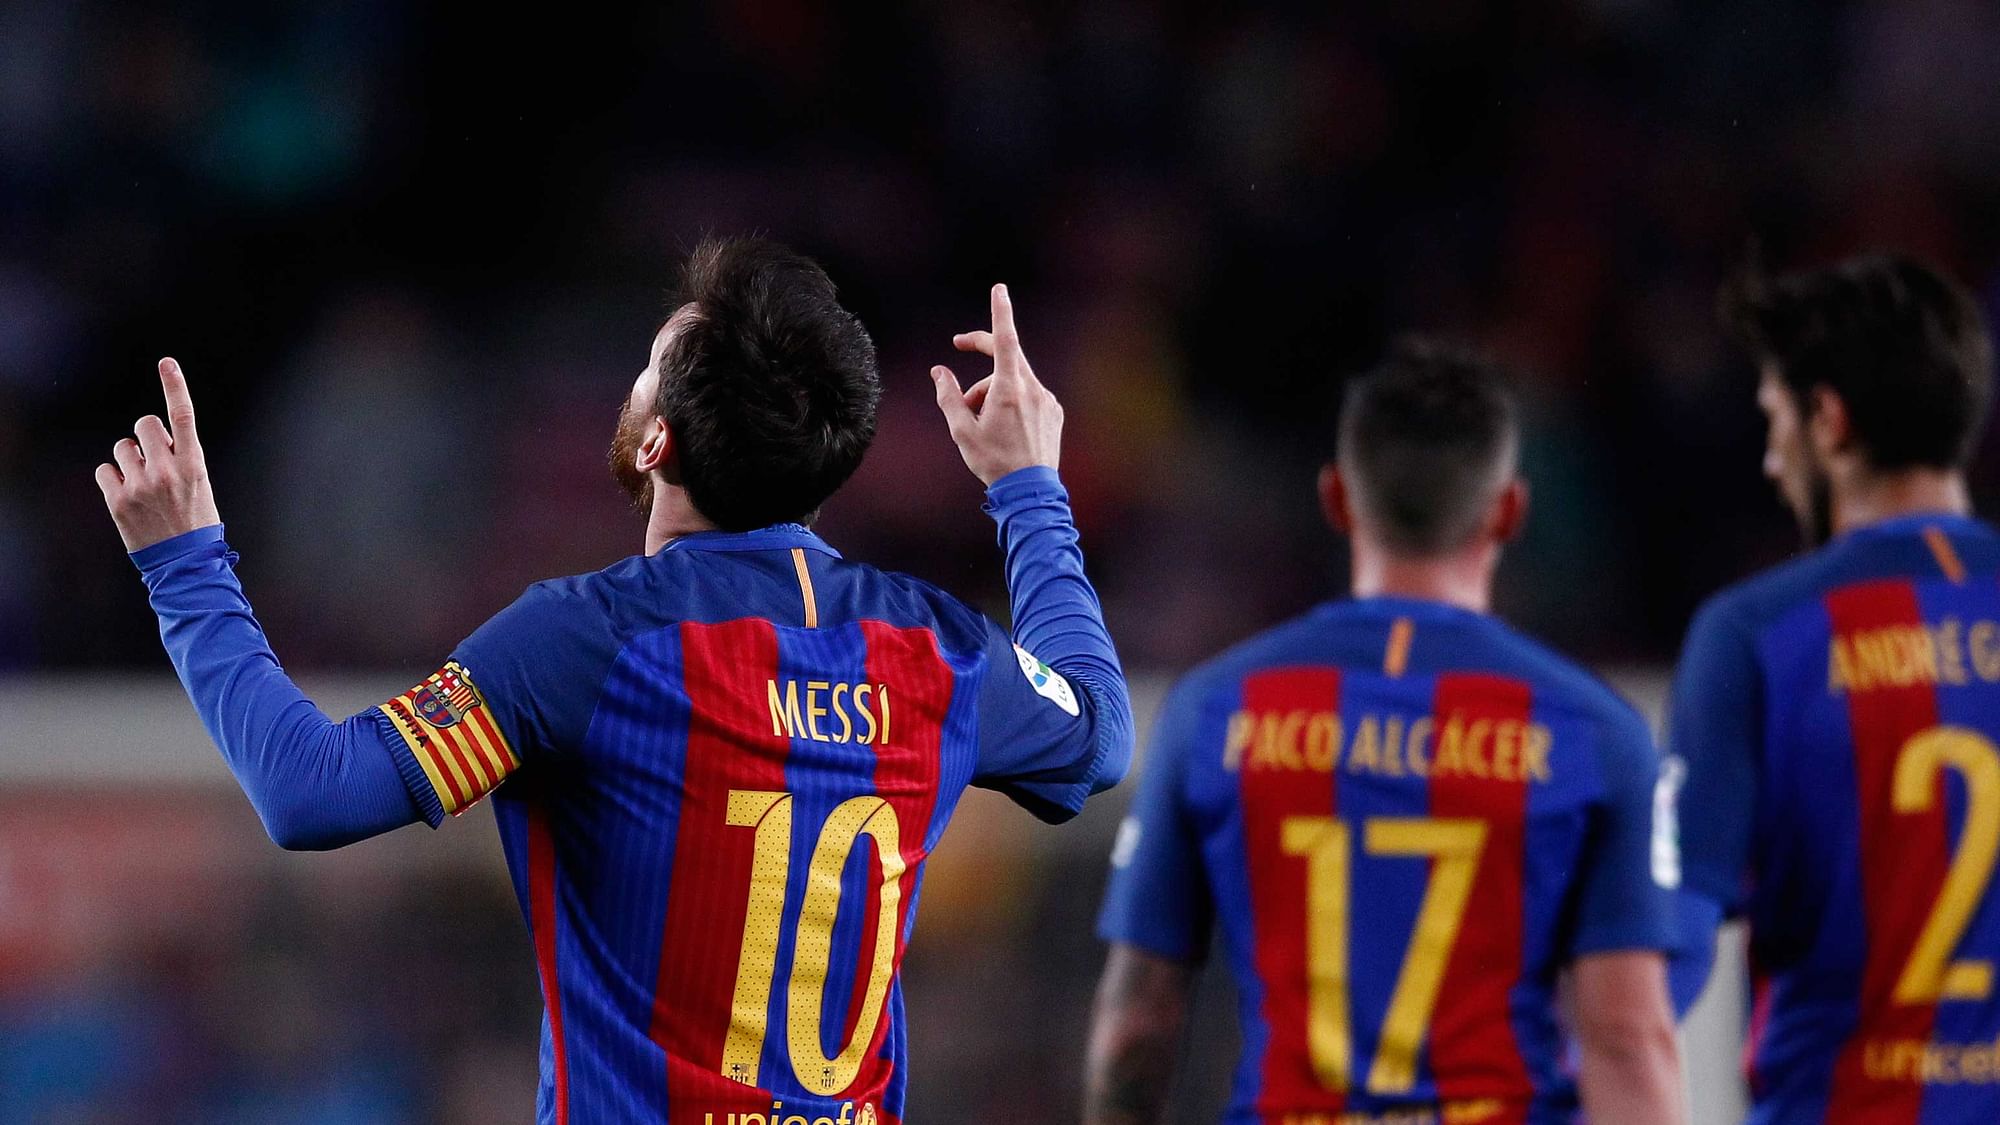 FC Barcelona’s Lionel Messi, left, celebrates after scoring during the Spanish La Liga soccer match between FC Barcelona and Osasuna at the Camp Nou. (Photo: AP)